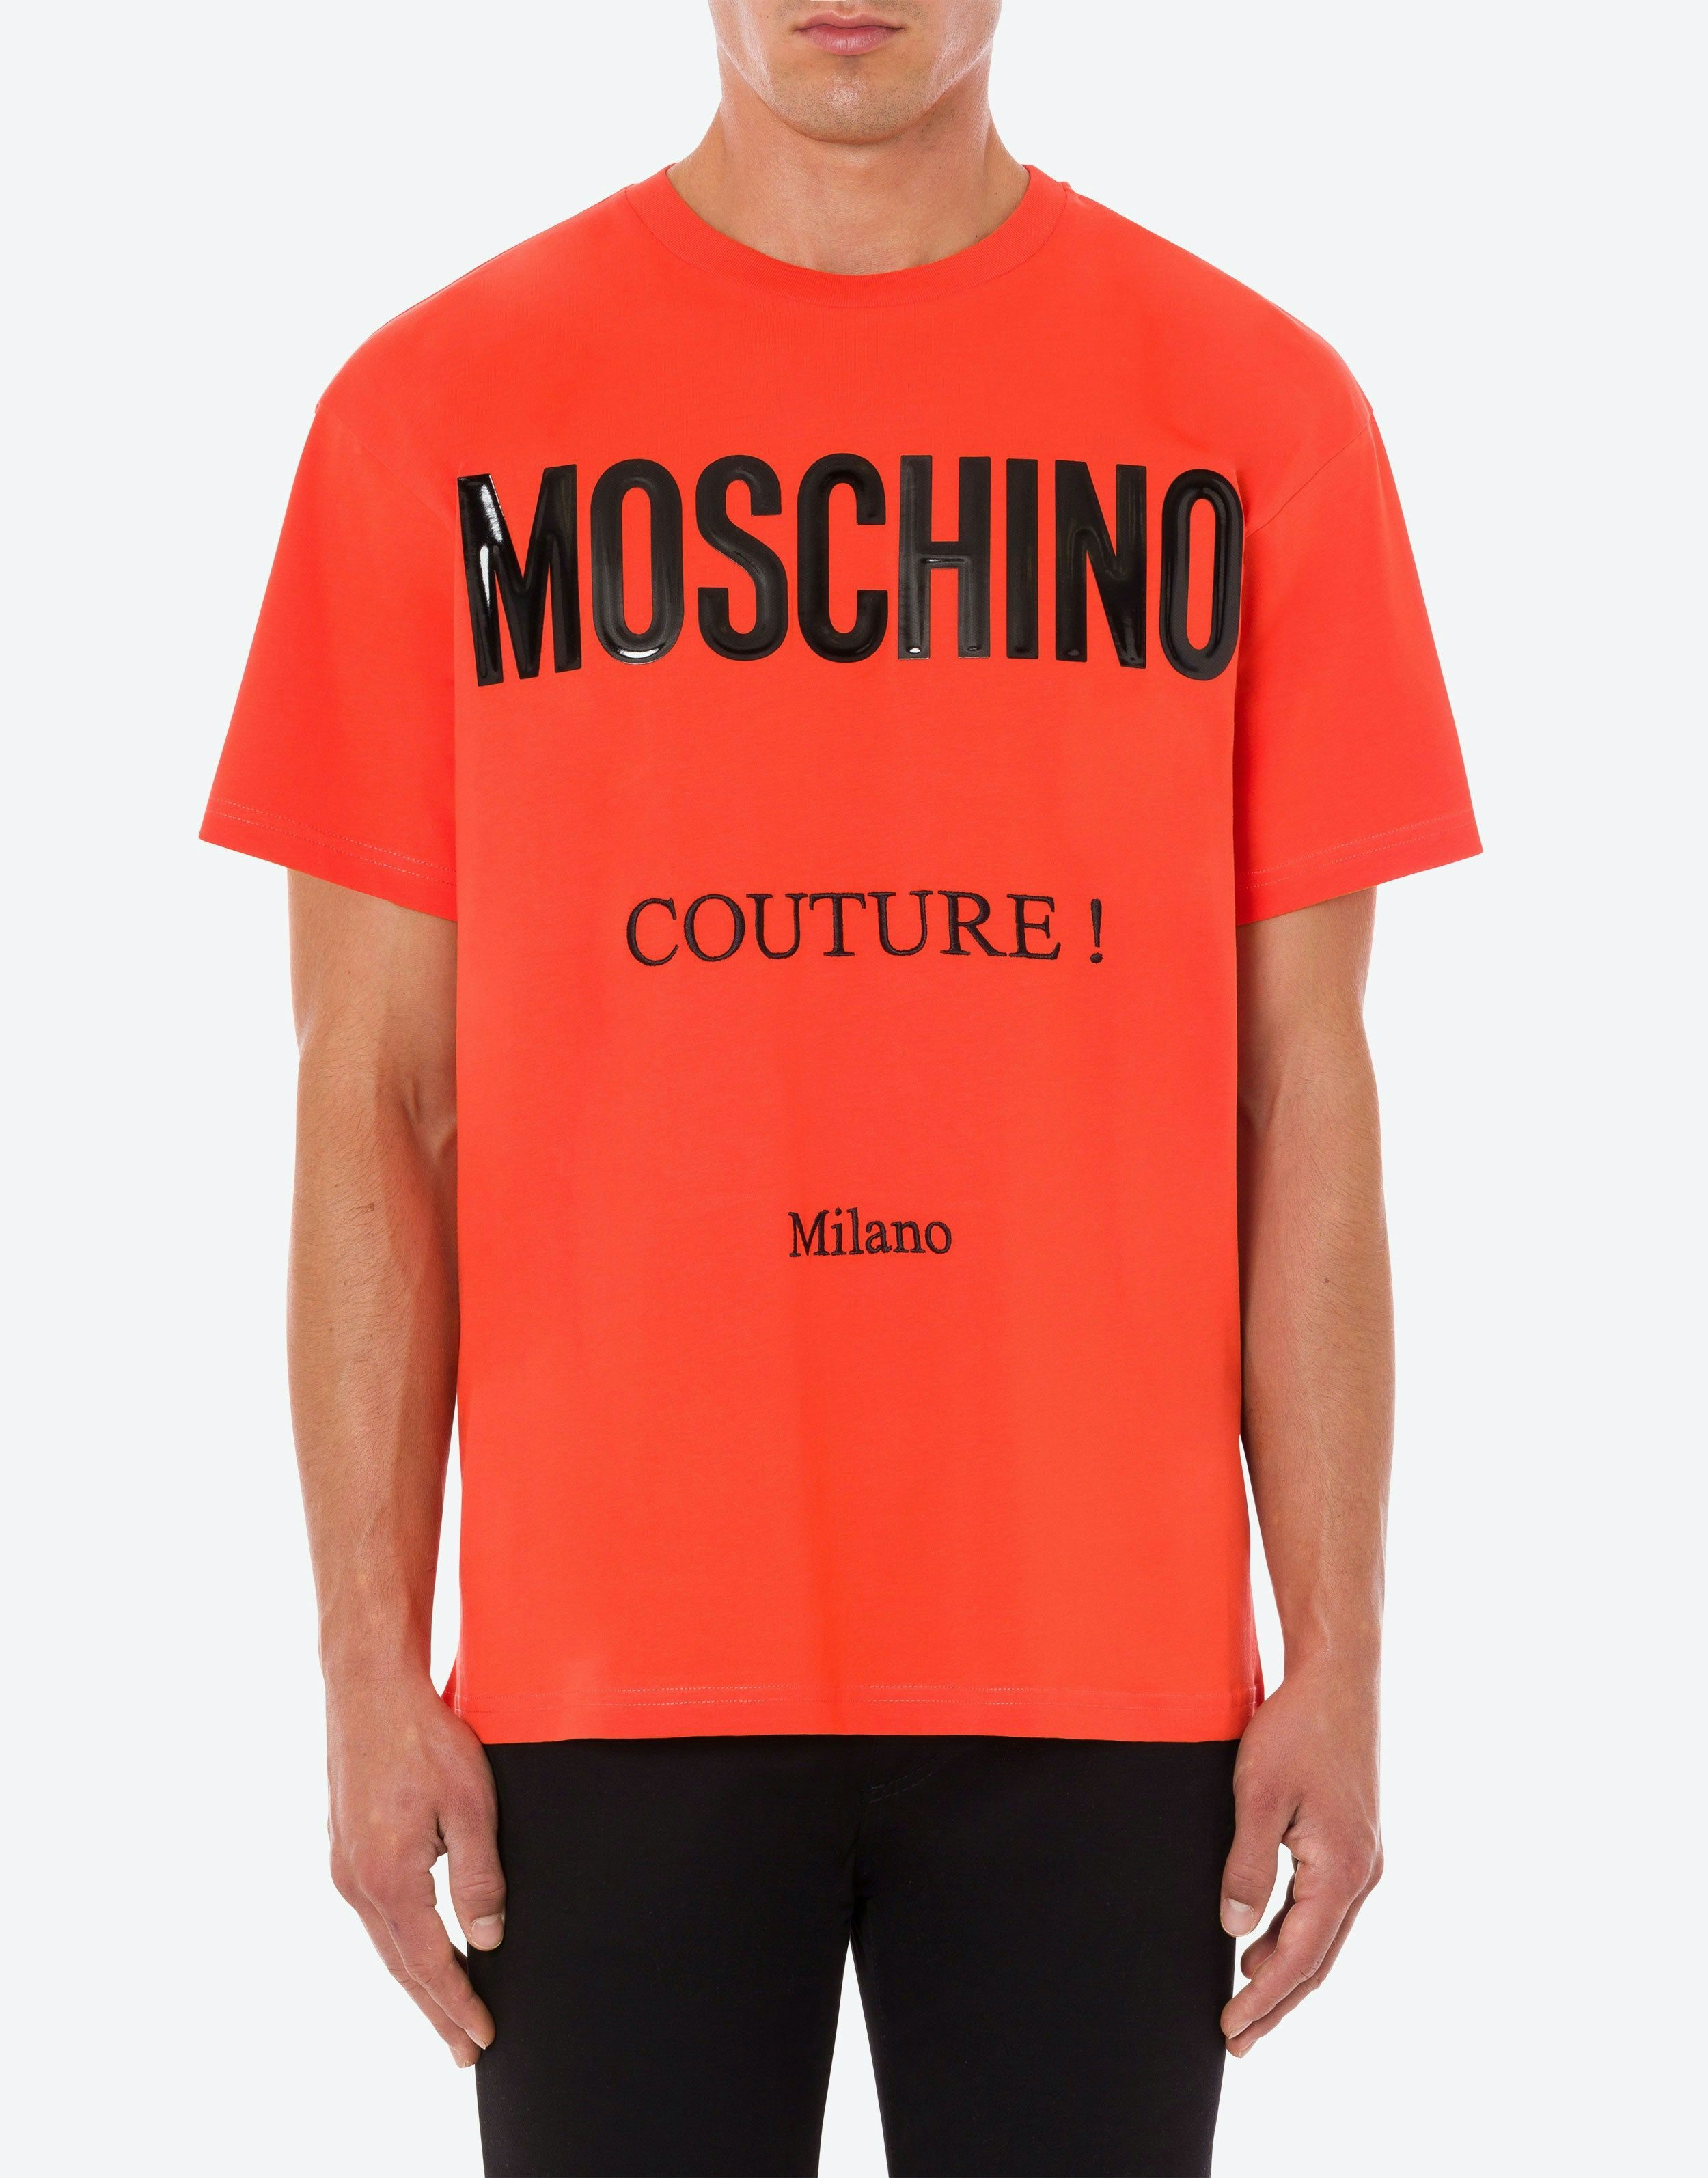 Moschino T-Shirts - Men Clothing | Moschino Official Store